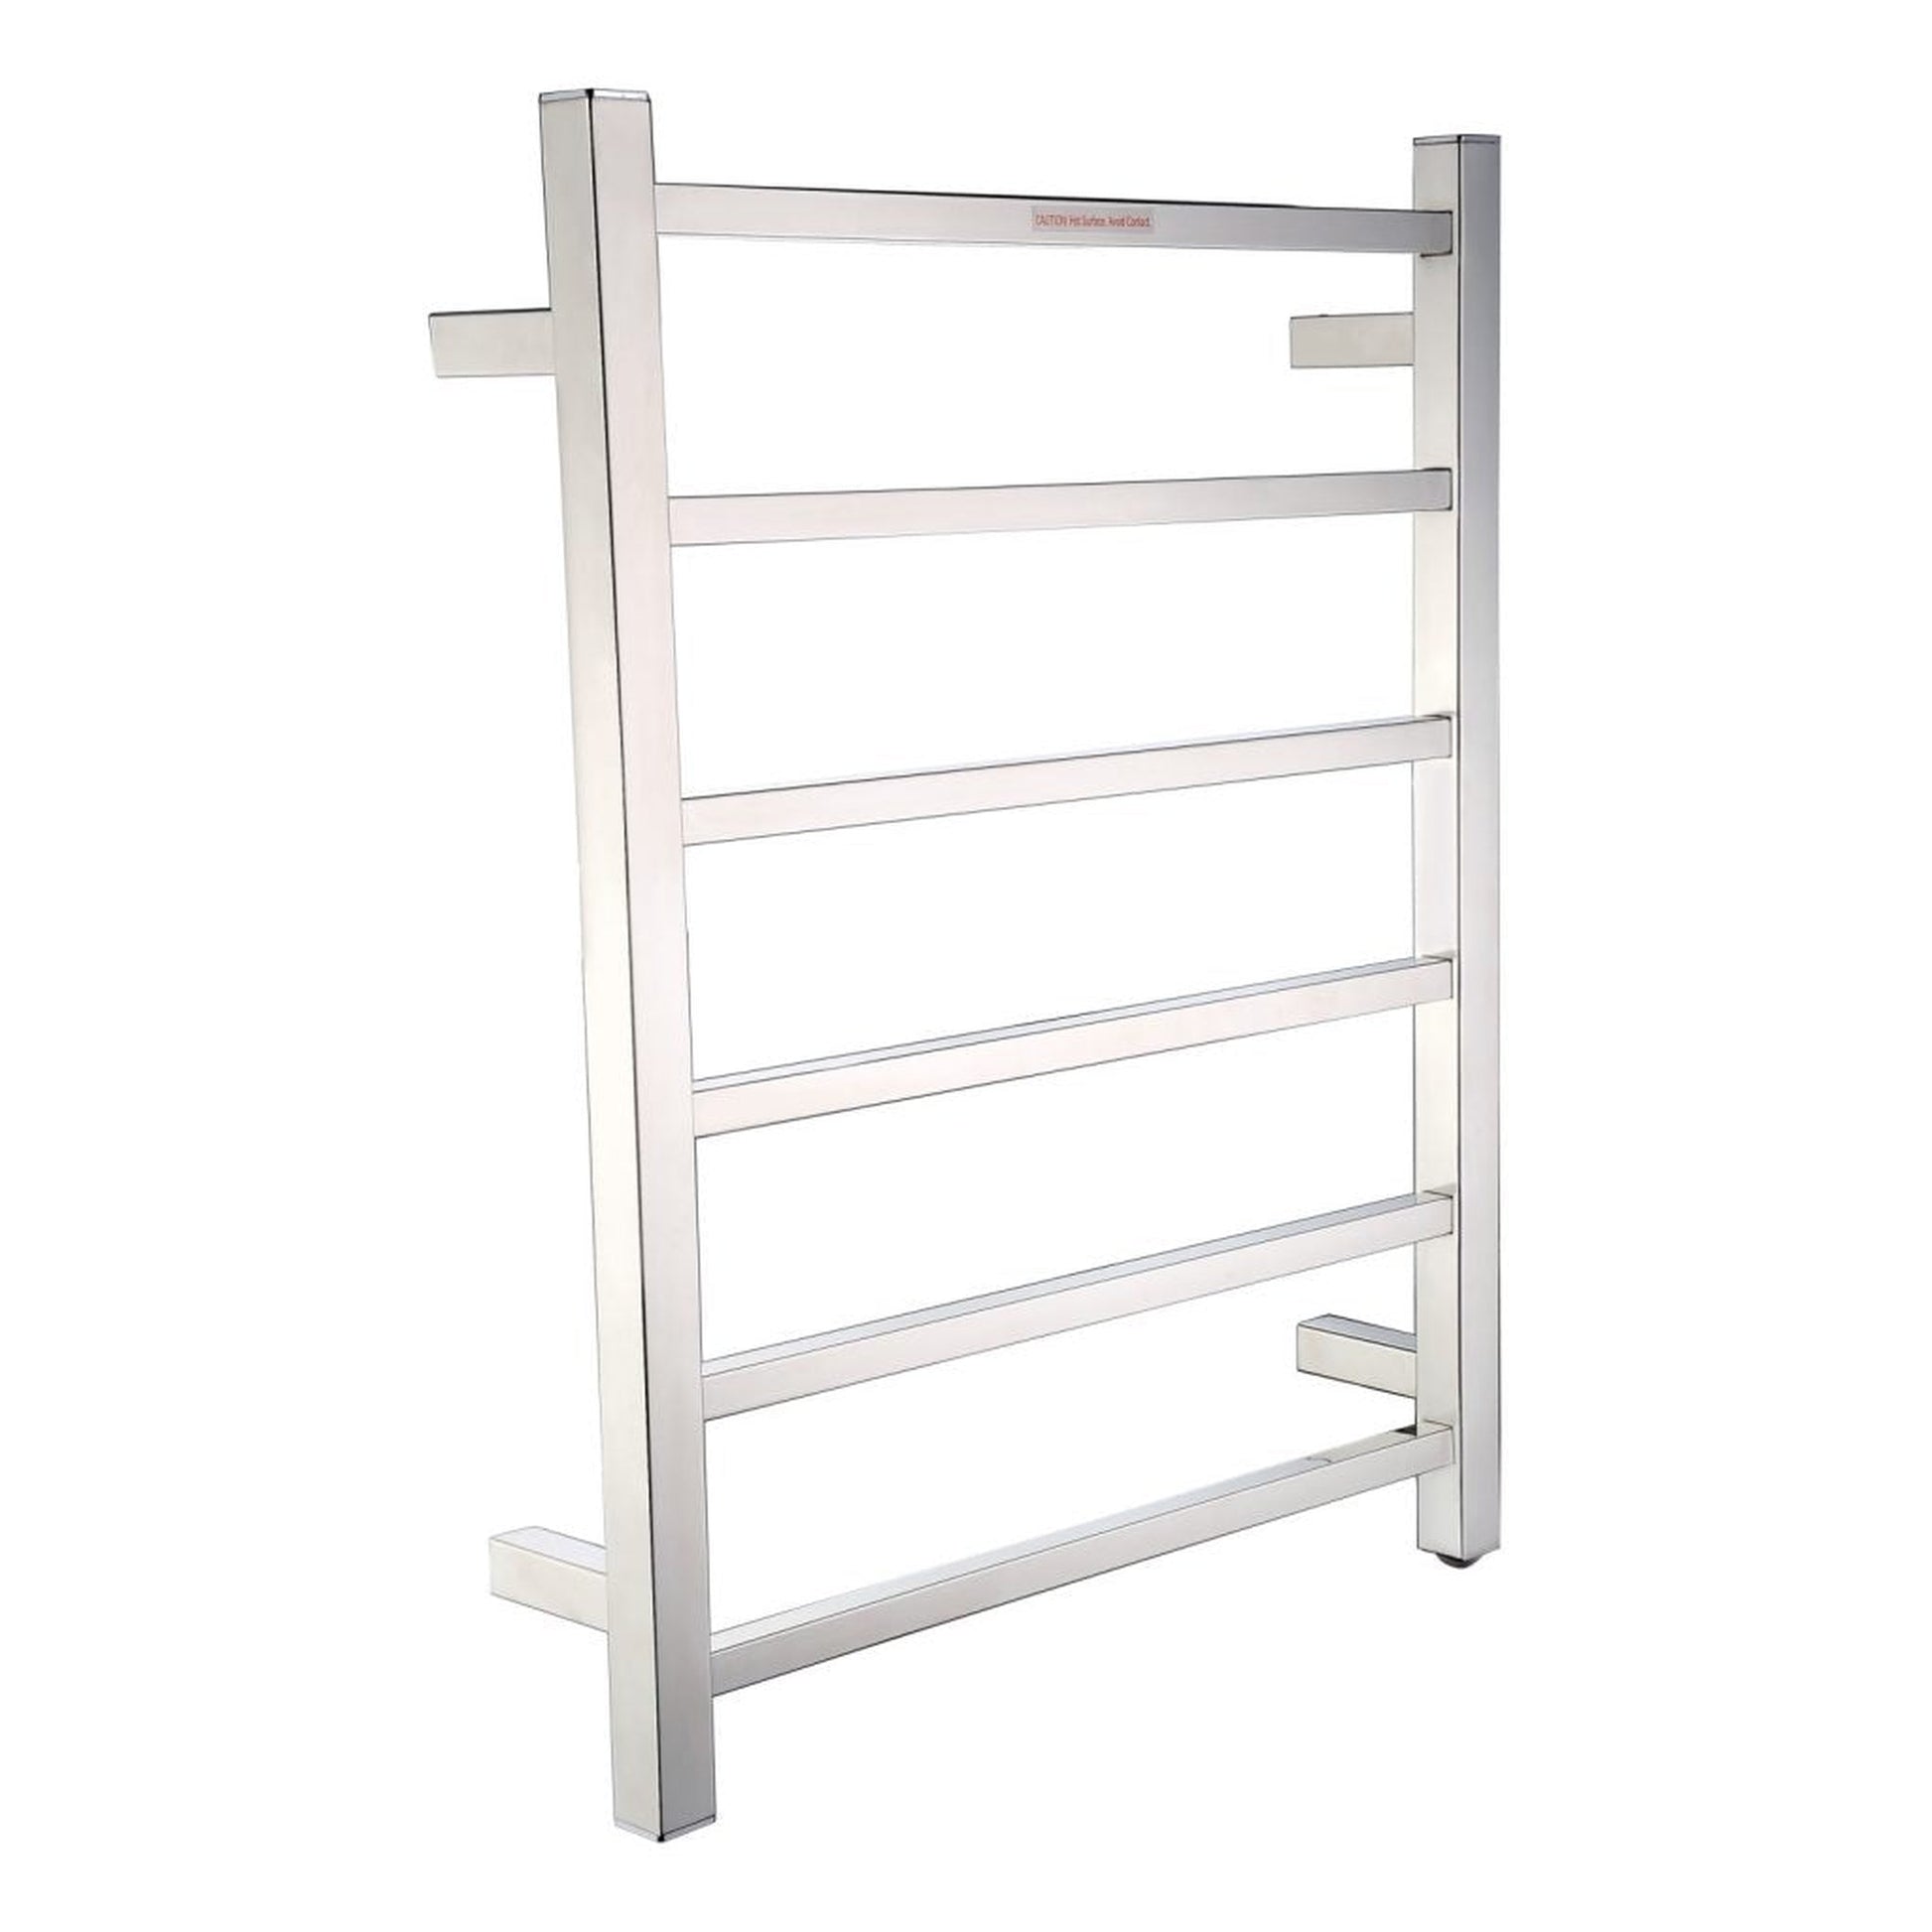 ANZZI Charles Series 6-Bar Stainless Steel Polished Chrome Wall-Mounted Electric Towel Warmer Rack